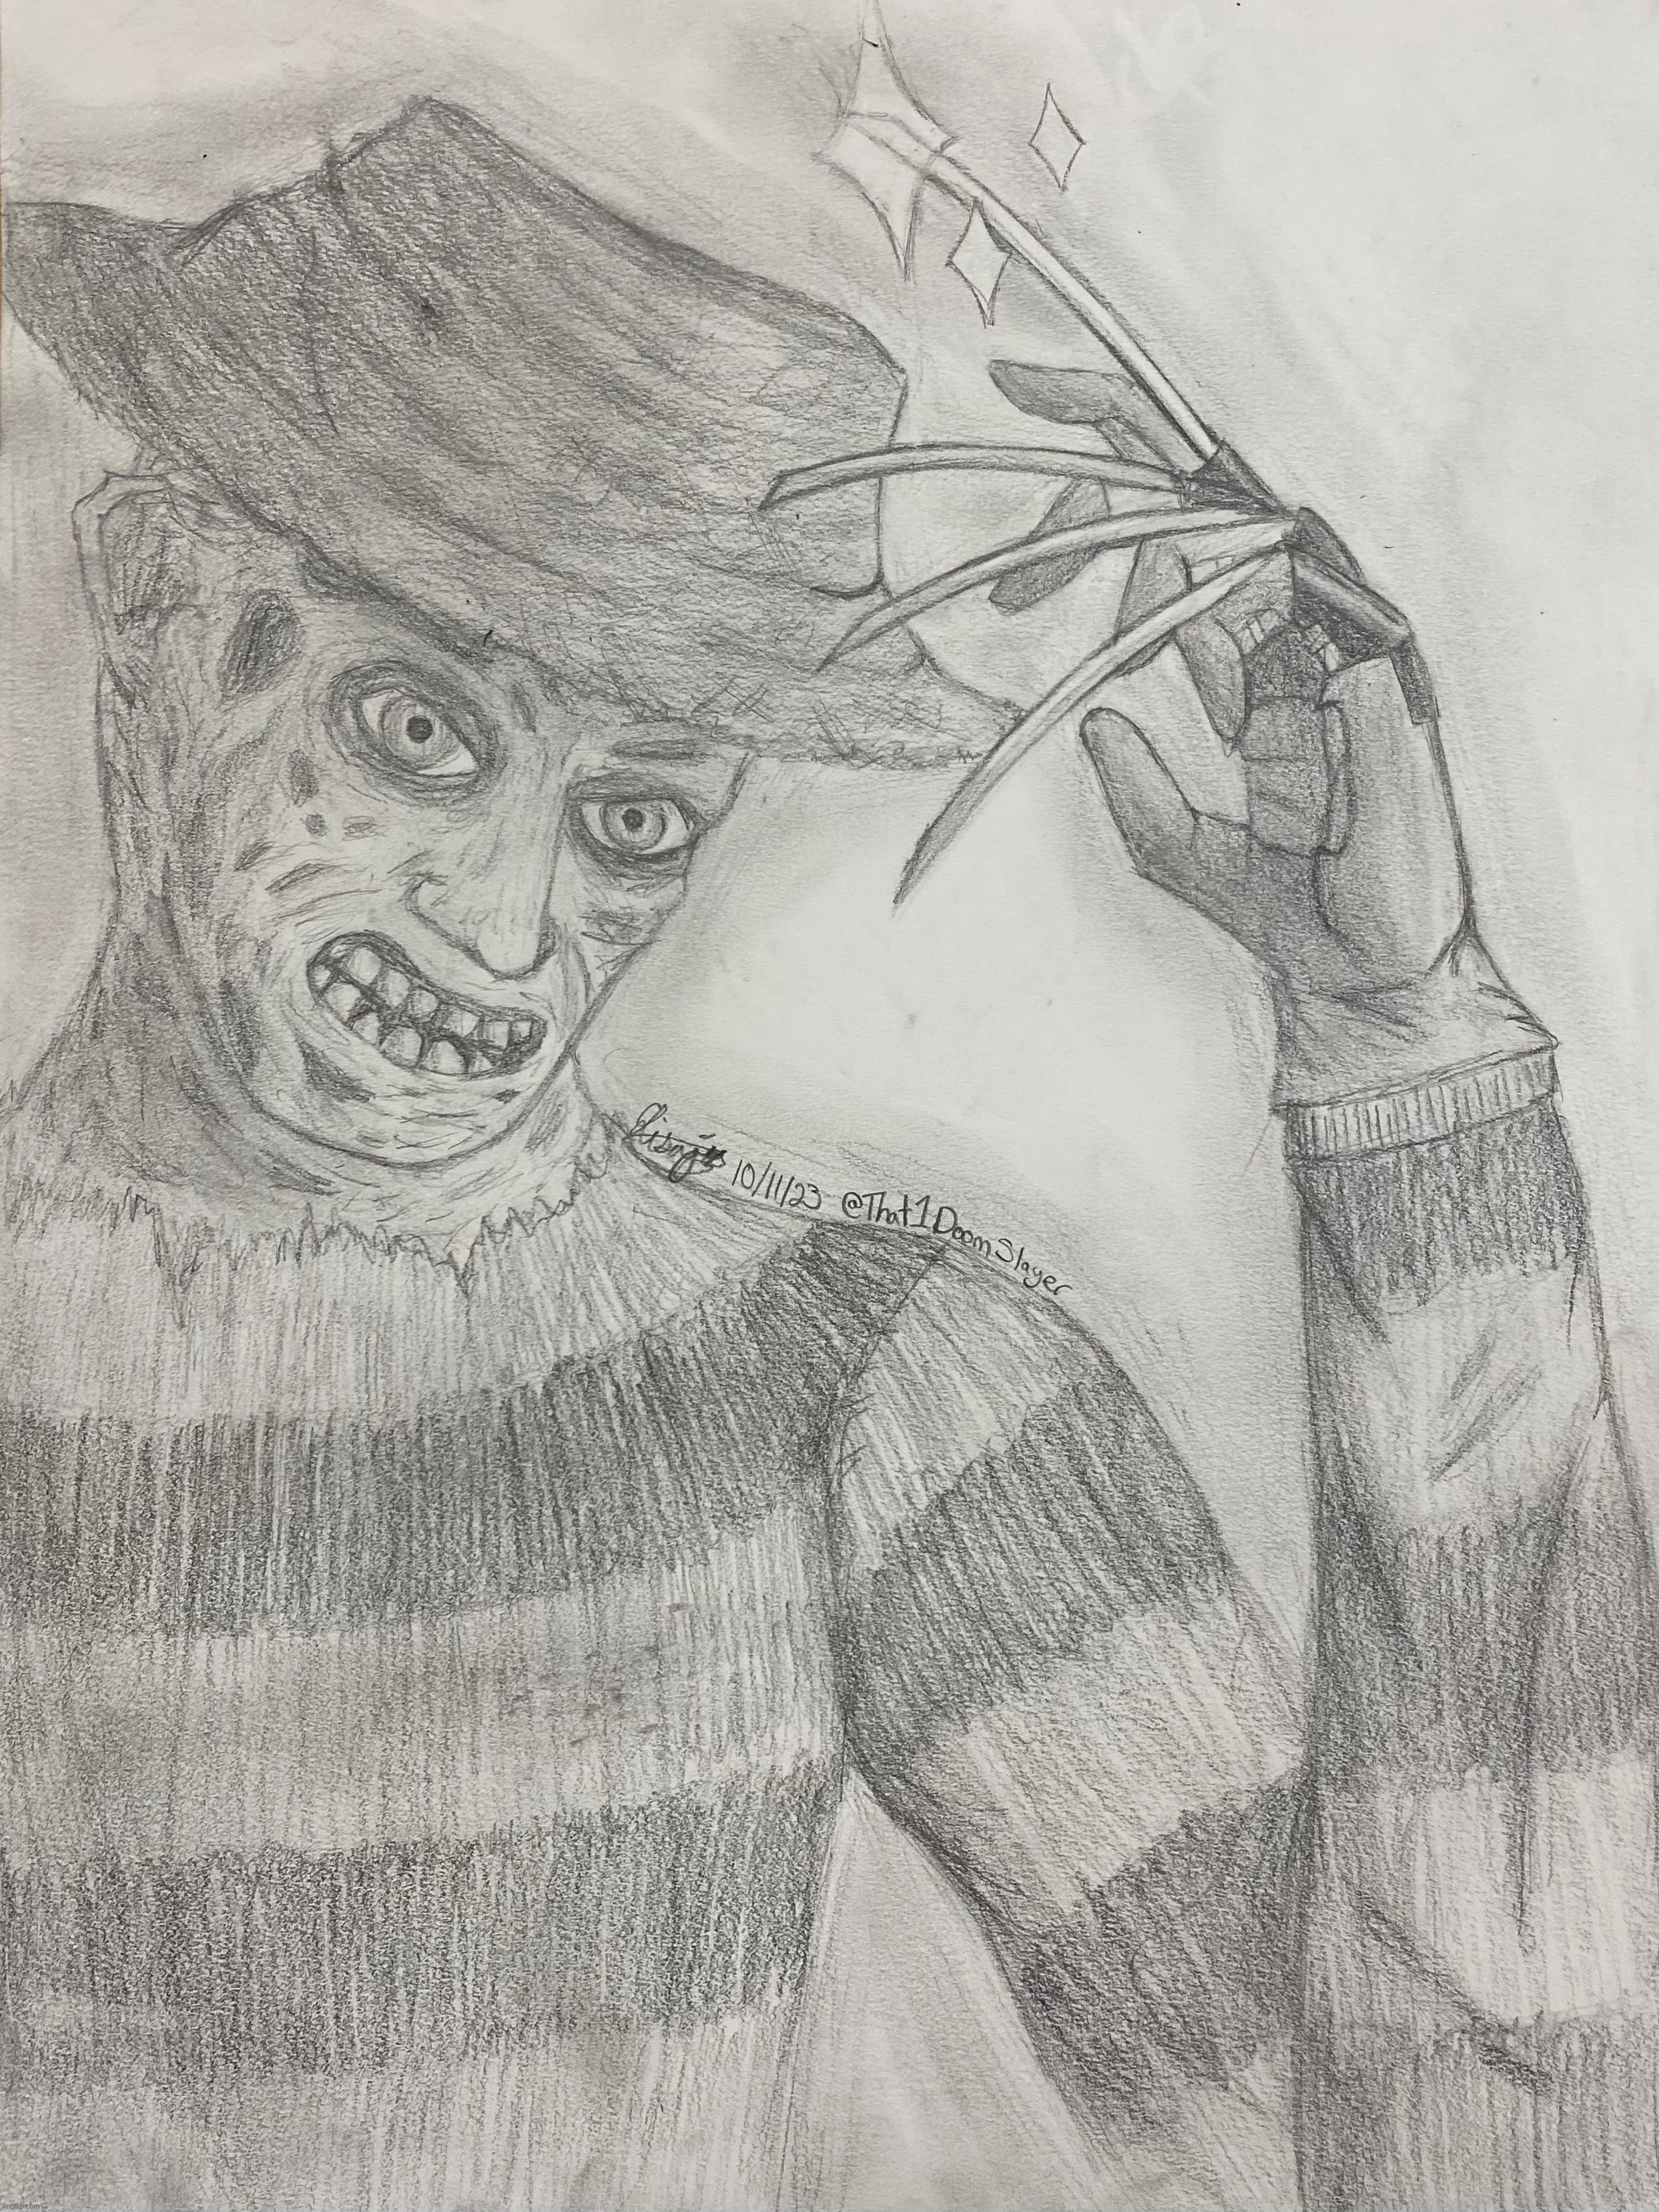 feddy cougar tee hee | image tagged in freddy krueger,drawing,spooky month,yippie | made w/ Imgflip meme maker